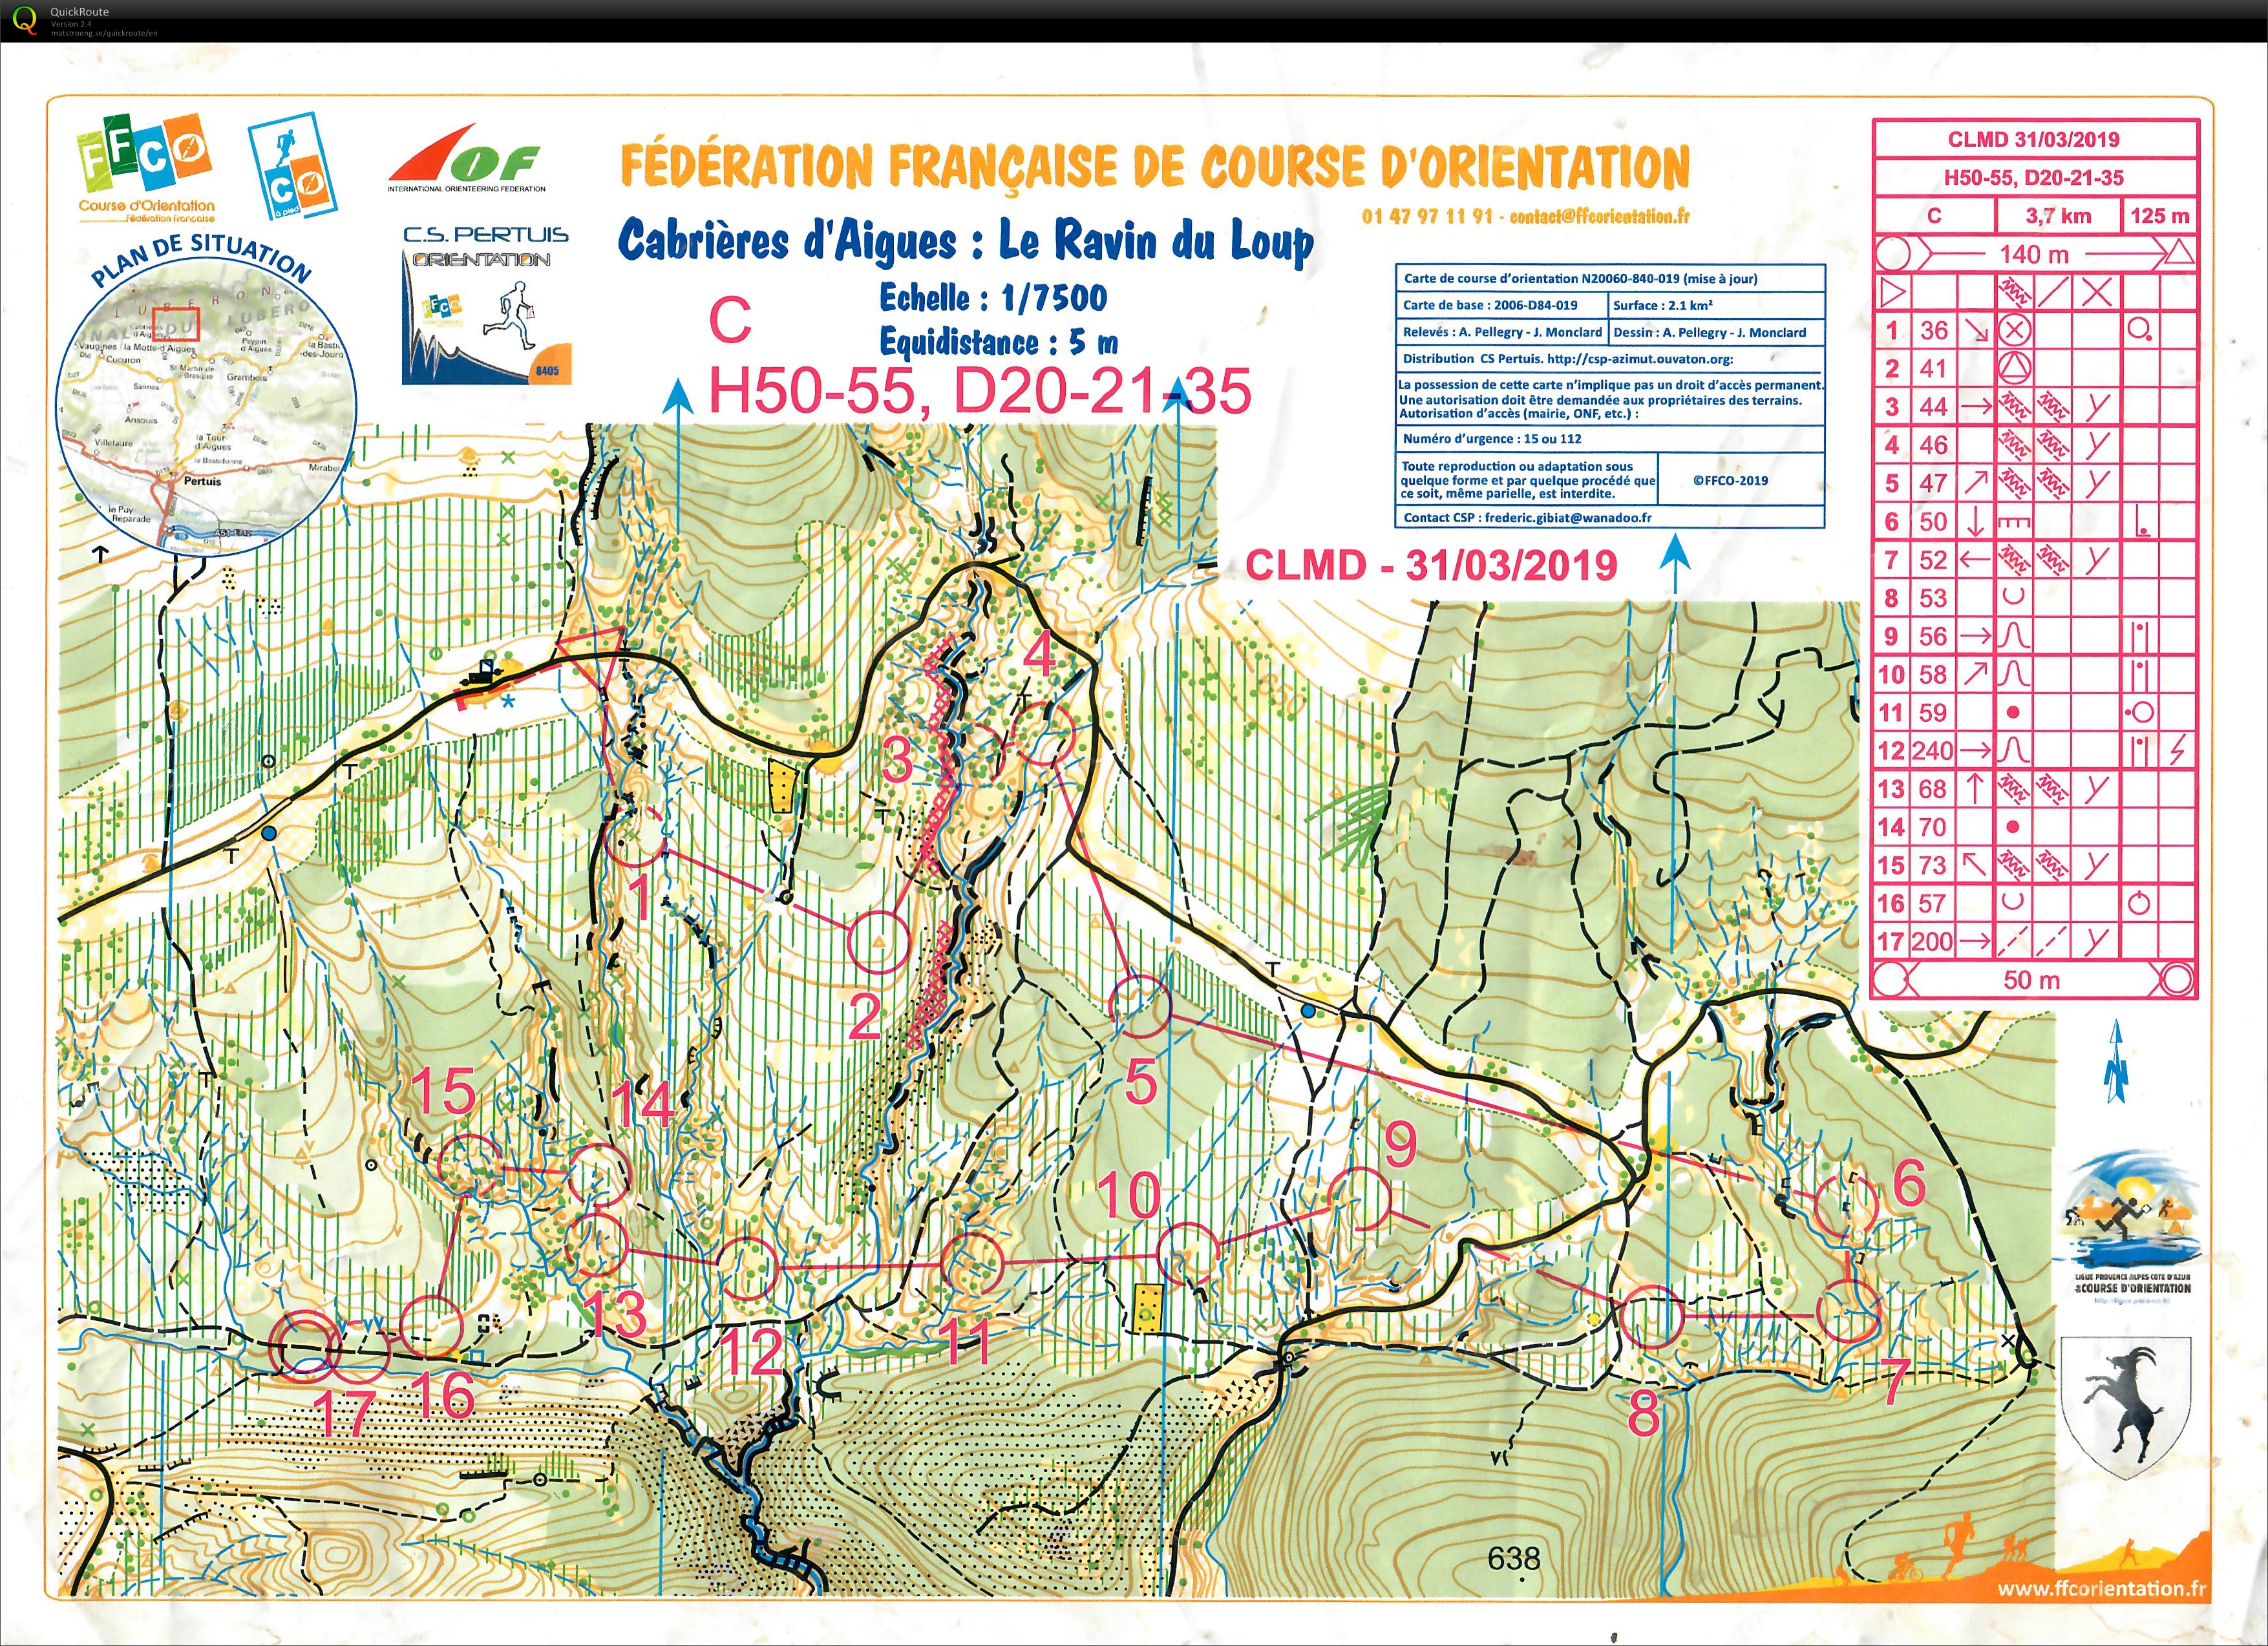 Provence champs middle - Luberon (2019-03-31)